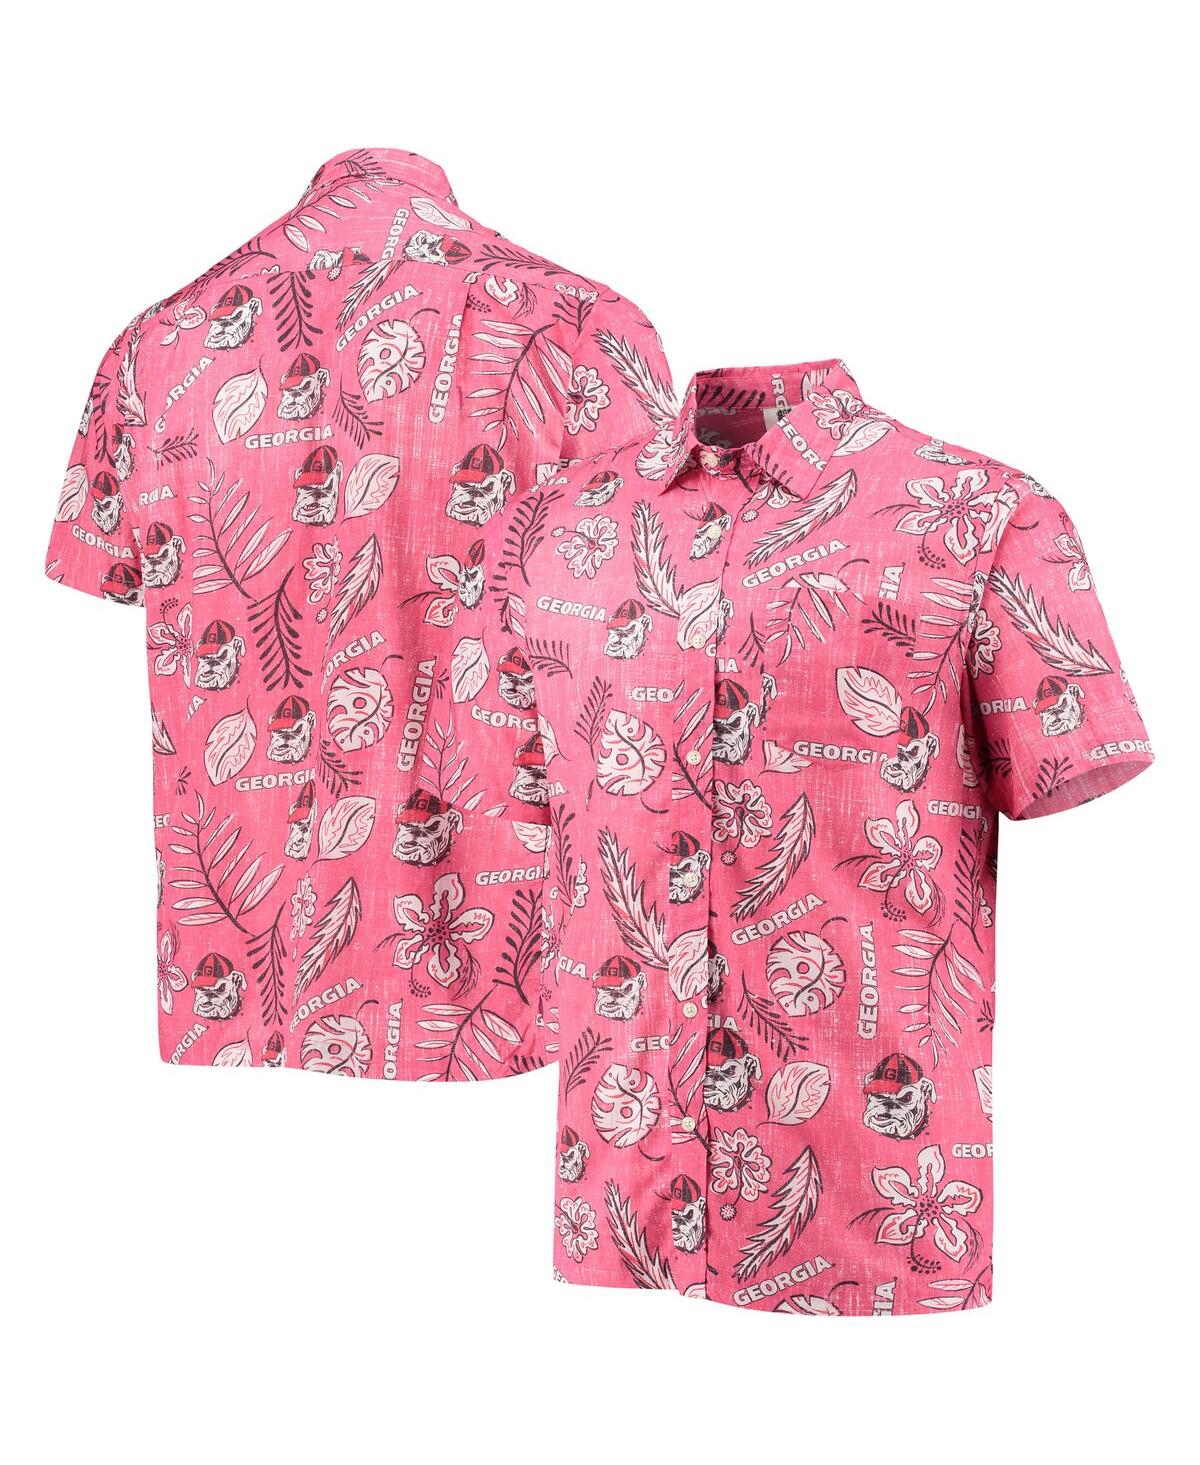 Wes & Willy Men's  Red Distressed Georgia Bulldogs Vintage-like Floral Button-up Shirt